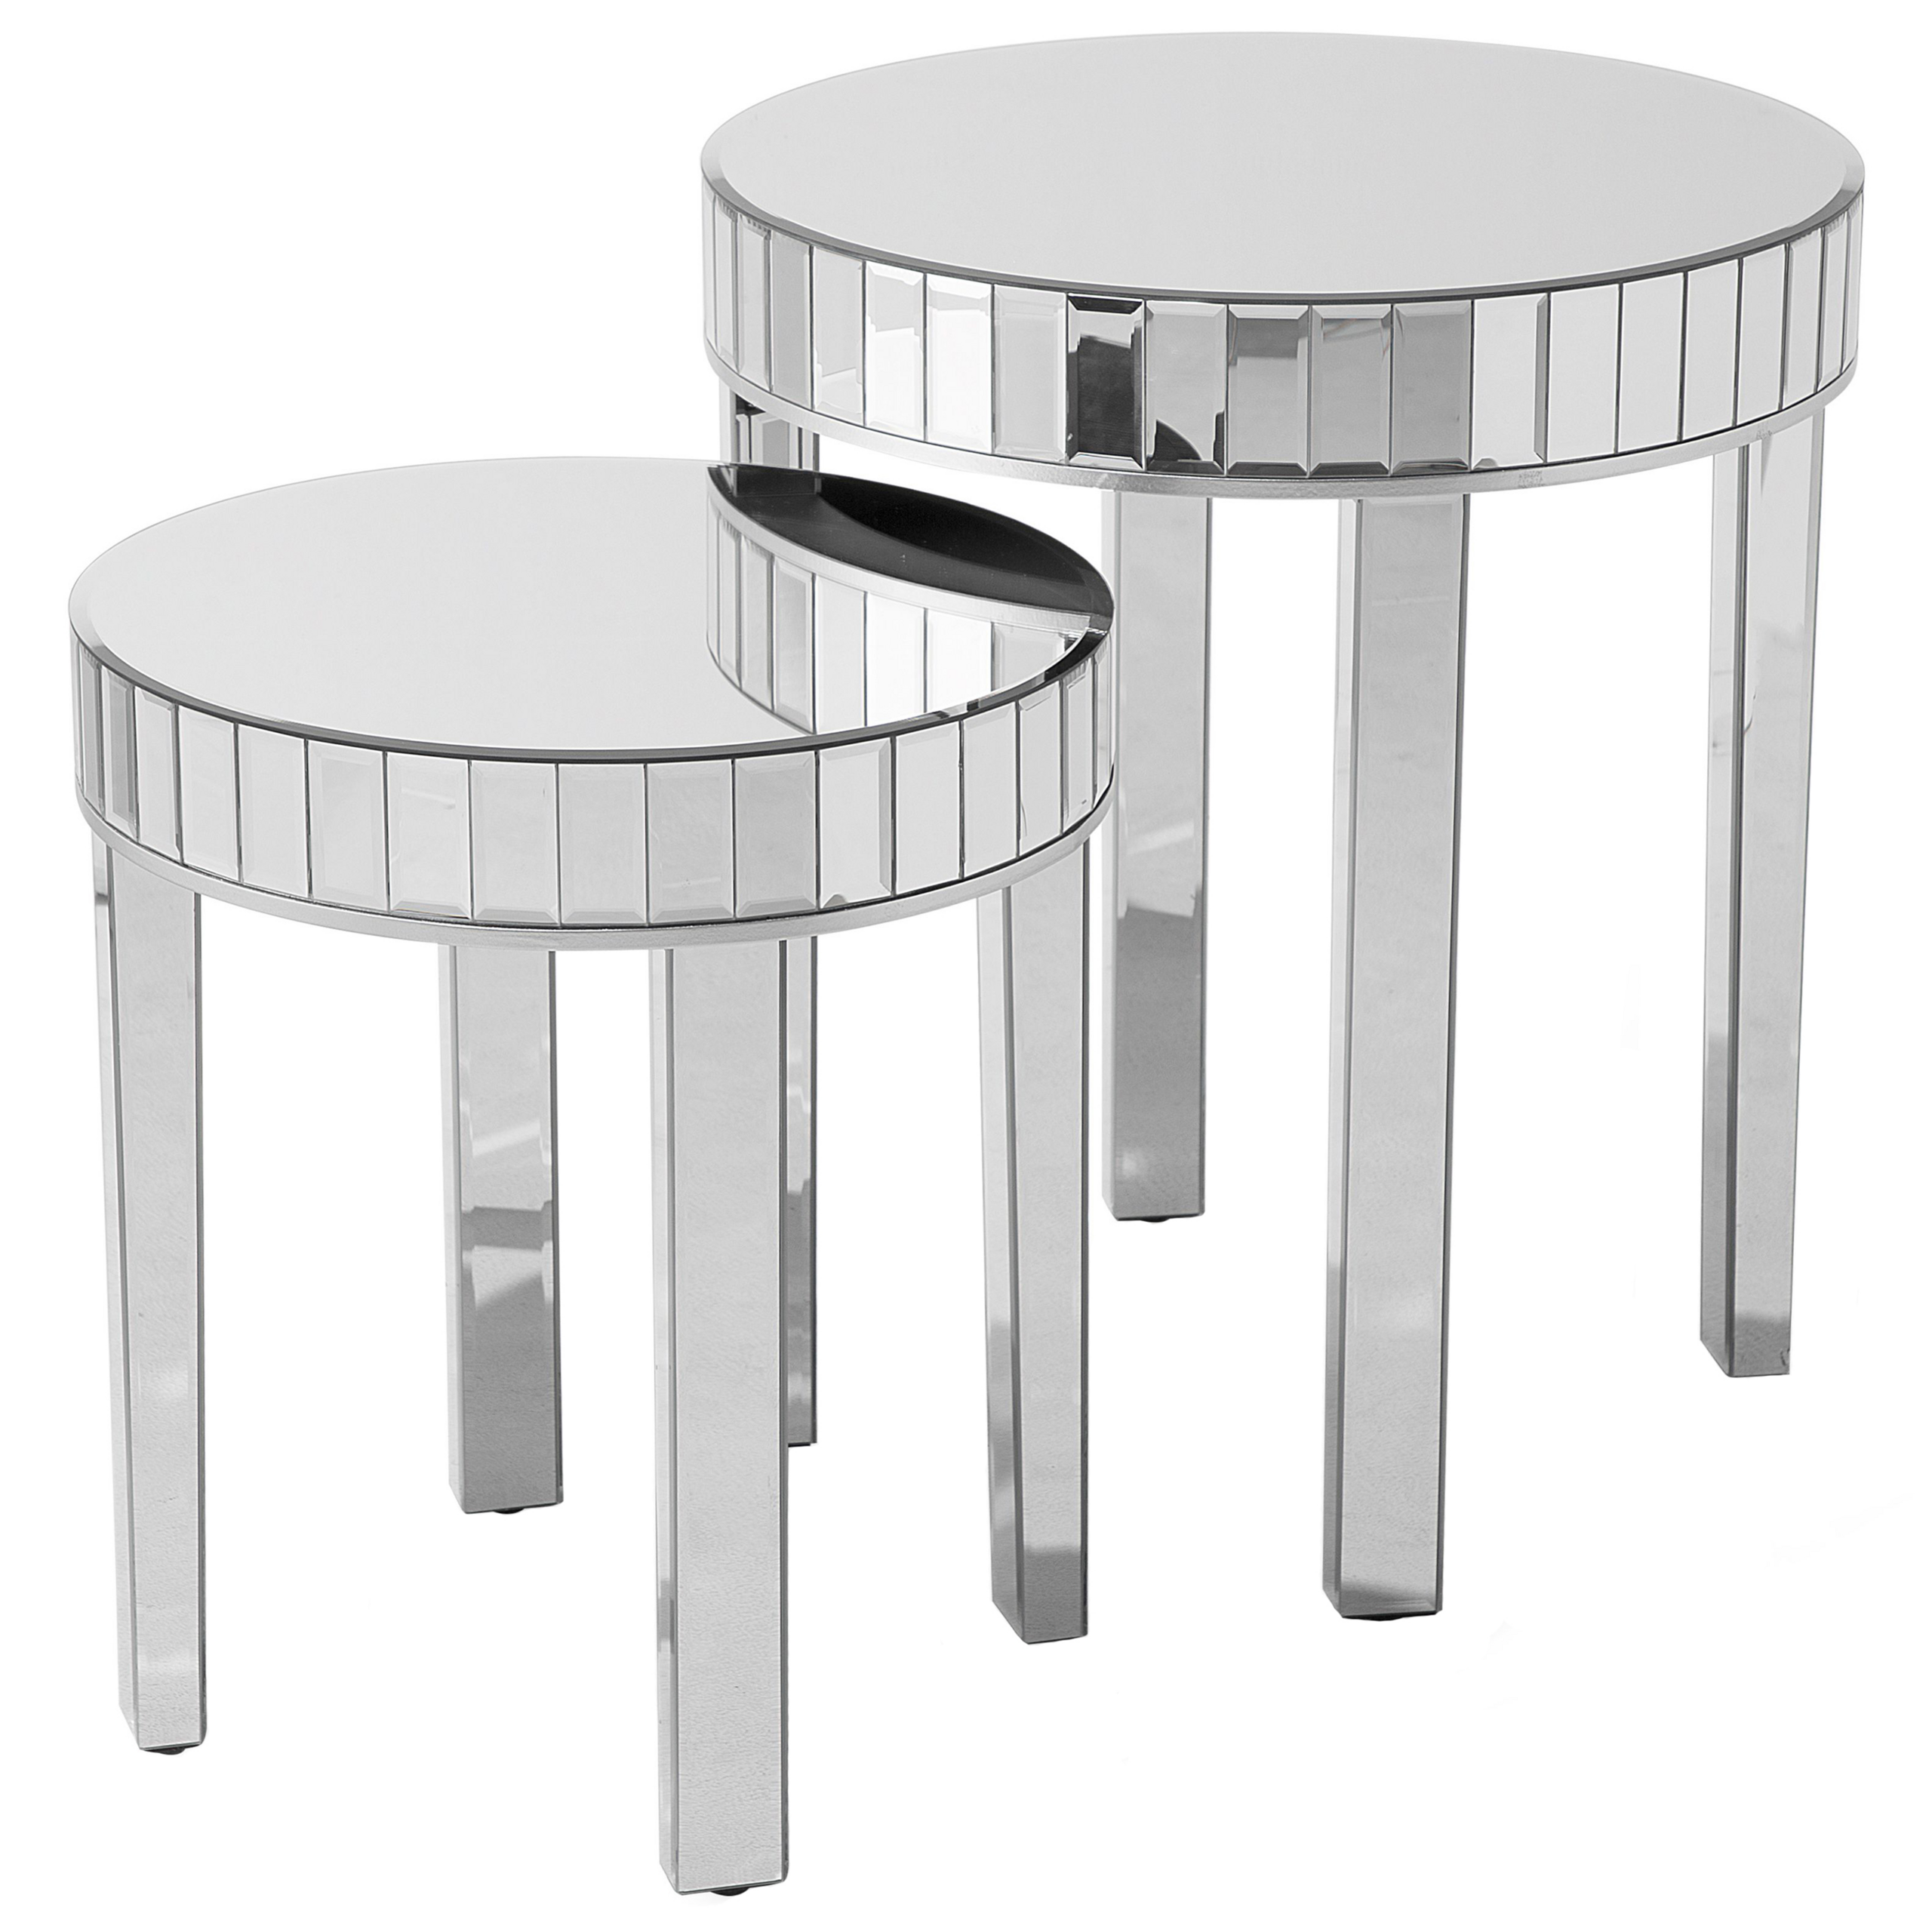 Beliani Nest of 2 Side Tables Silver Mirrored Glass Round Top Glamour Living Room Set